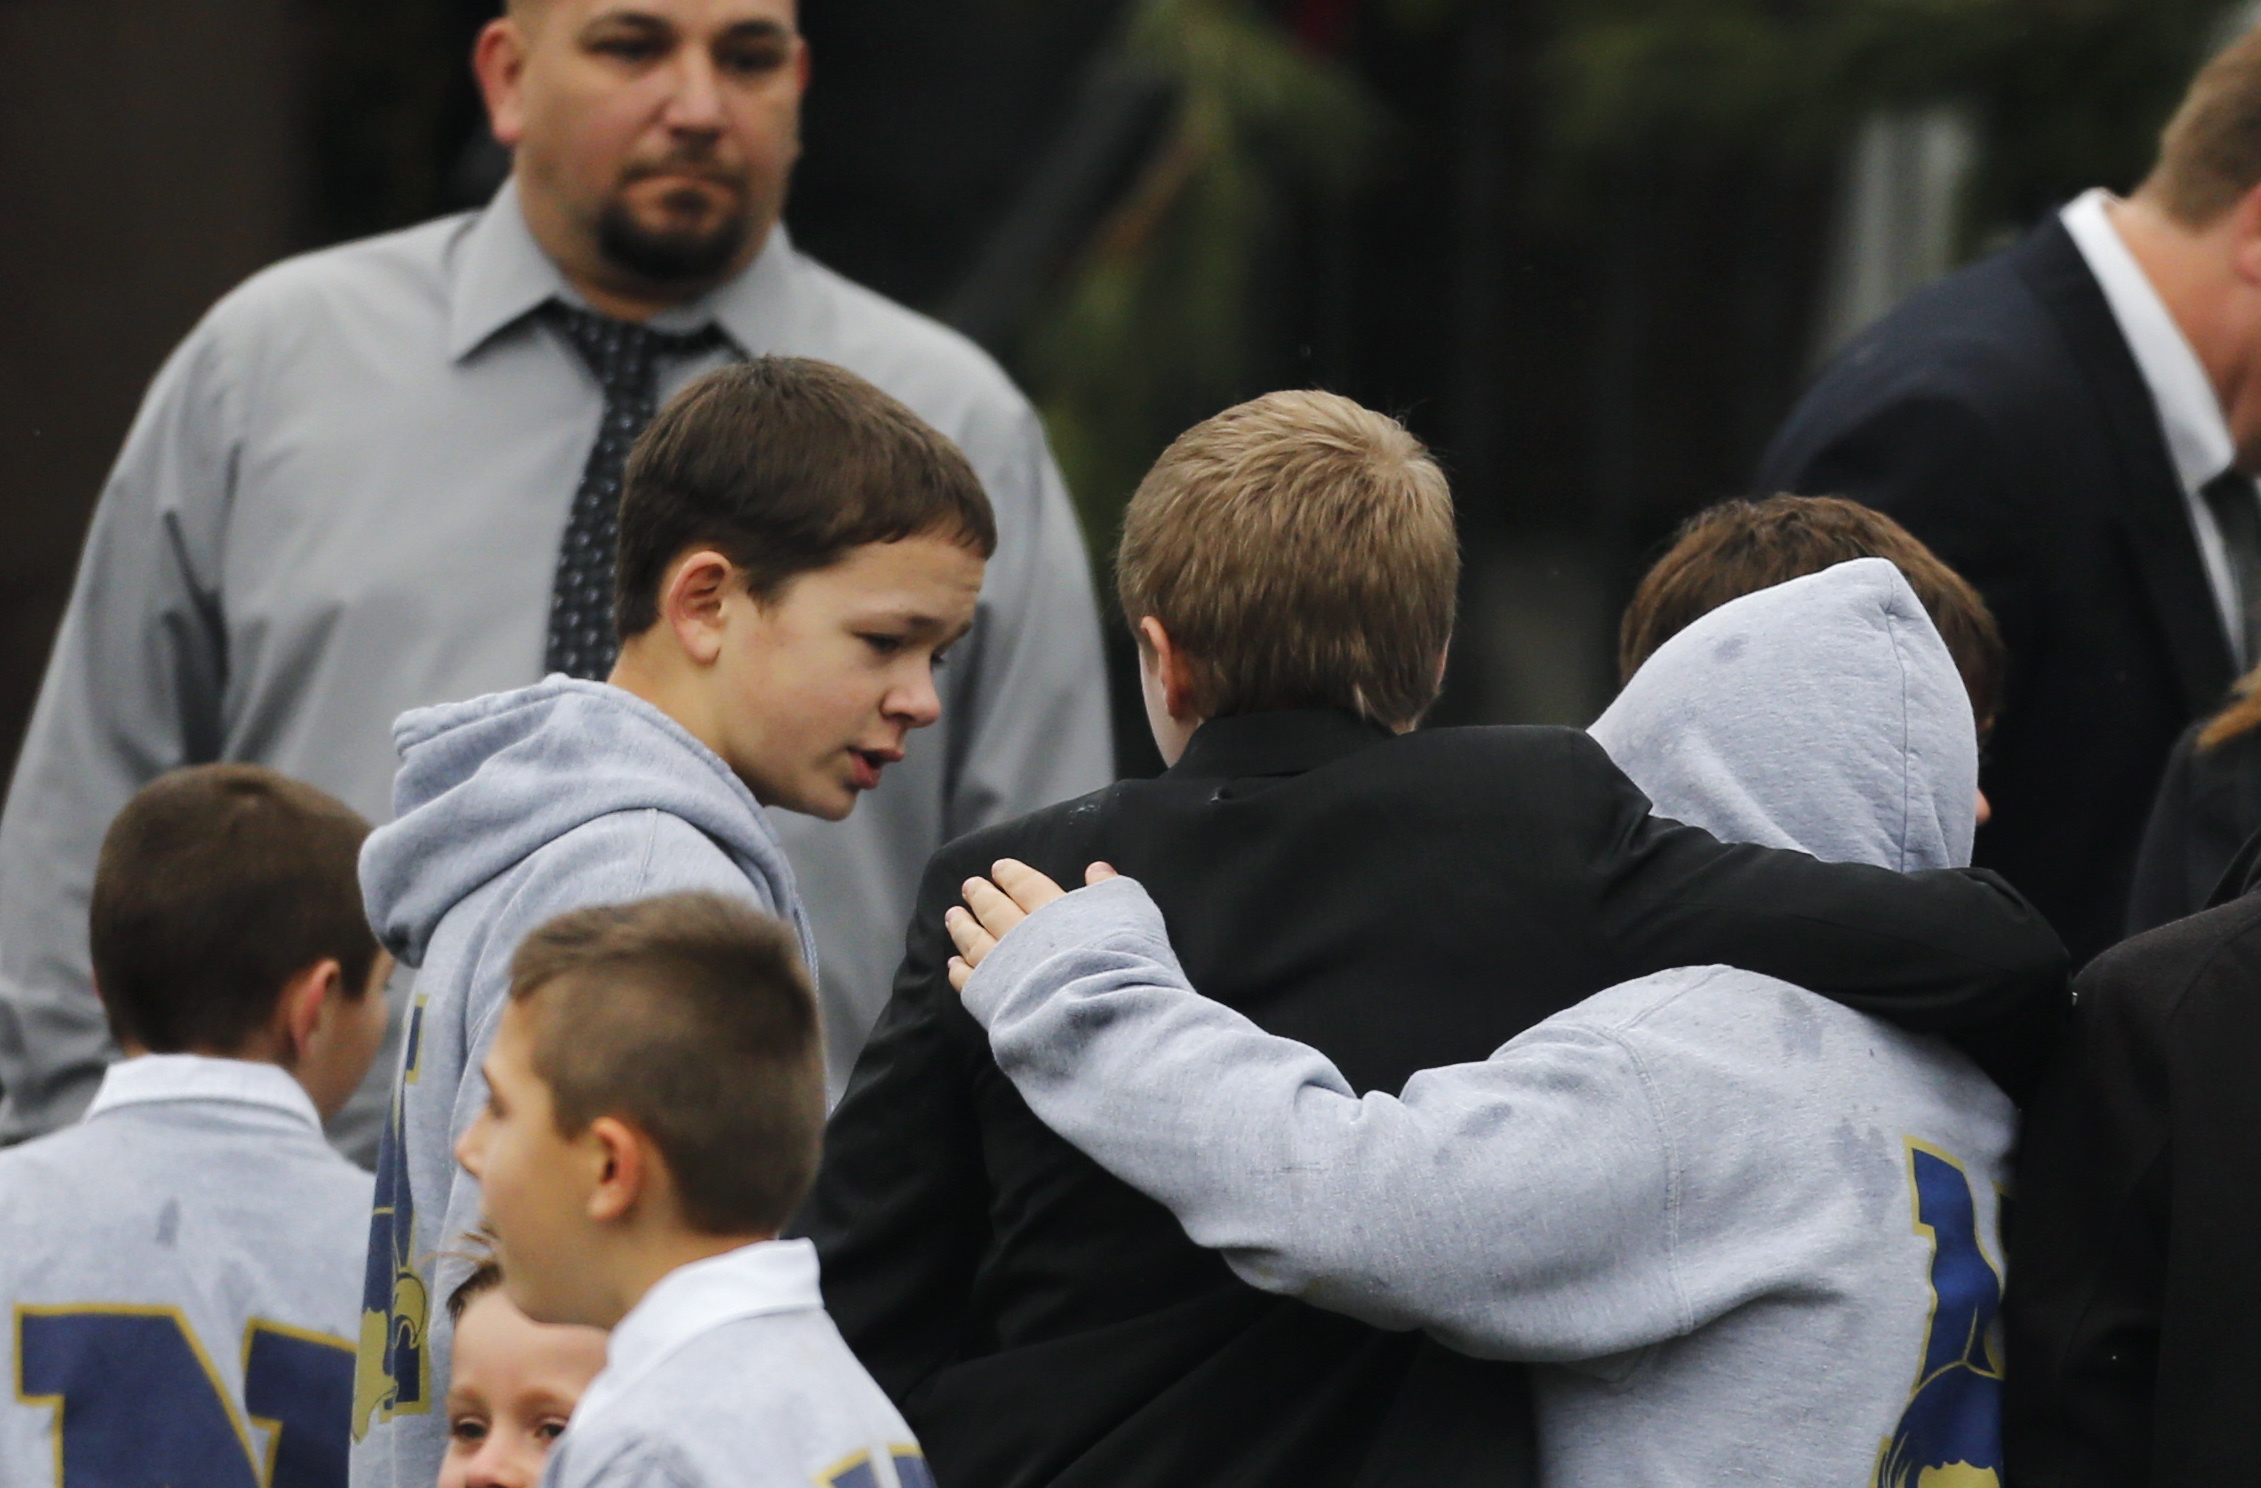 Students embrace while wearing Newtown school shirts outside the funeral for 6-year-old shooting victim Jack Pinto in Newtown, Conn., on Monday.